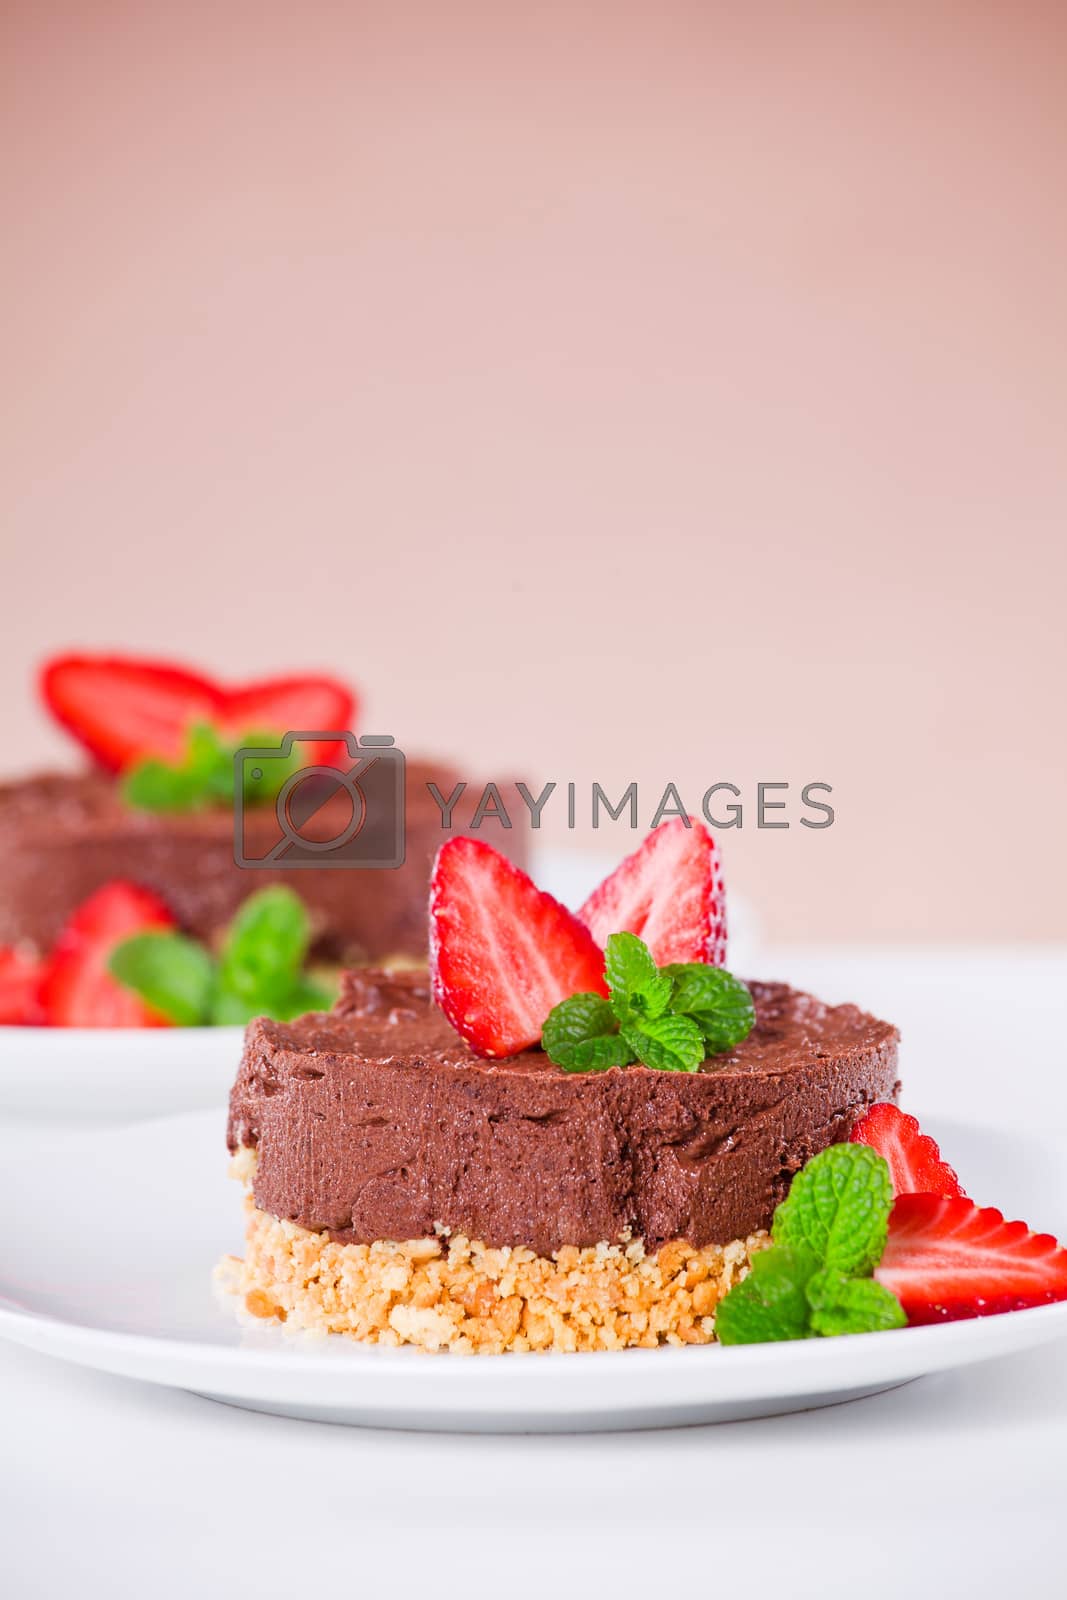 Royalty free image of Chocolate Dessert by mpessaris